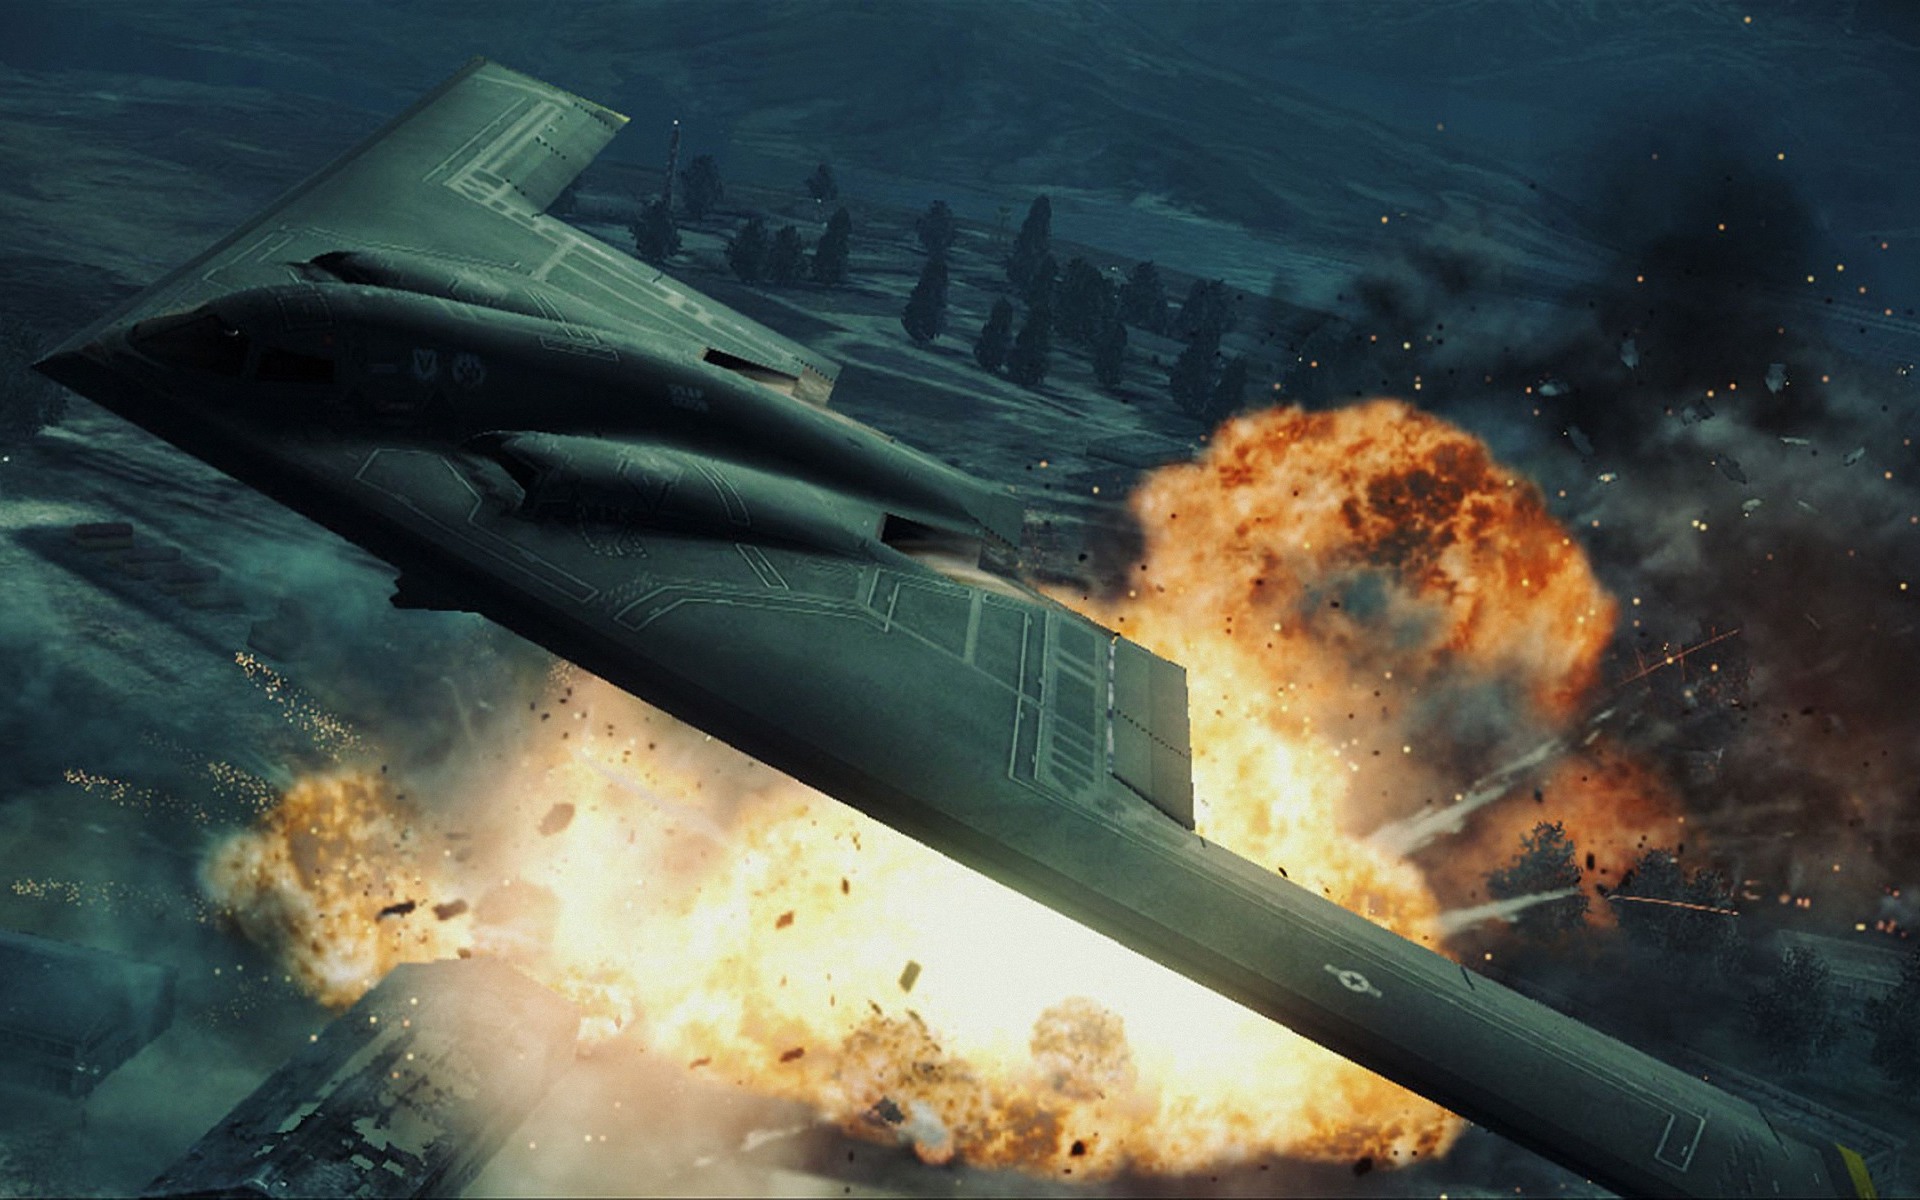 ace, Combat, Game, Jet, Airplane, Aircraft, Fighter, Plane, Military, Battle, Explosion, Fire, City Wallpaper